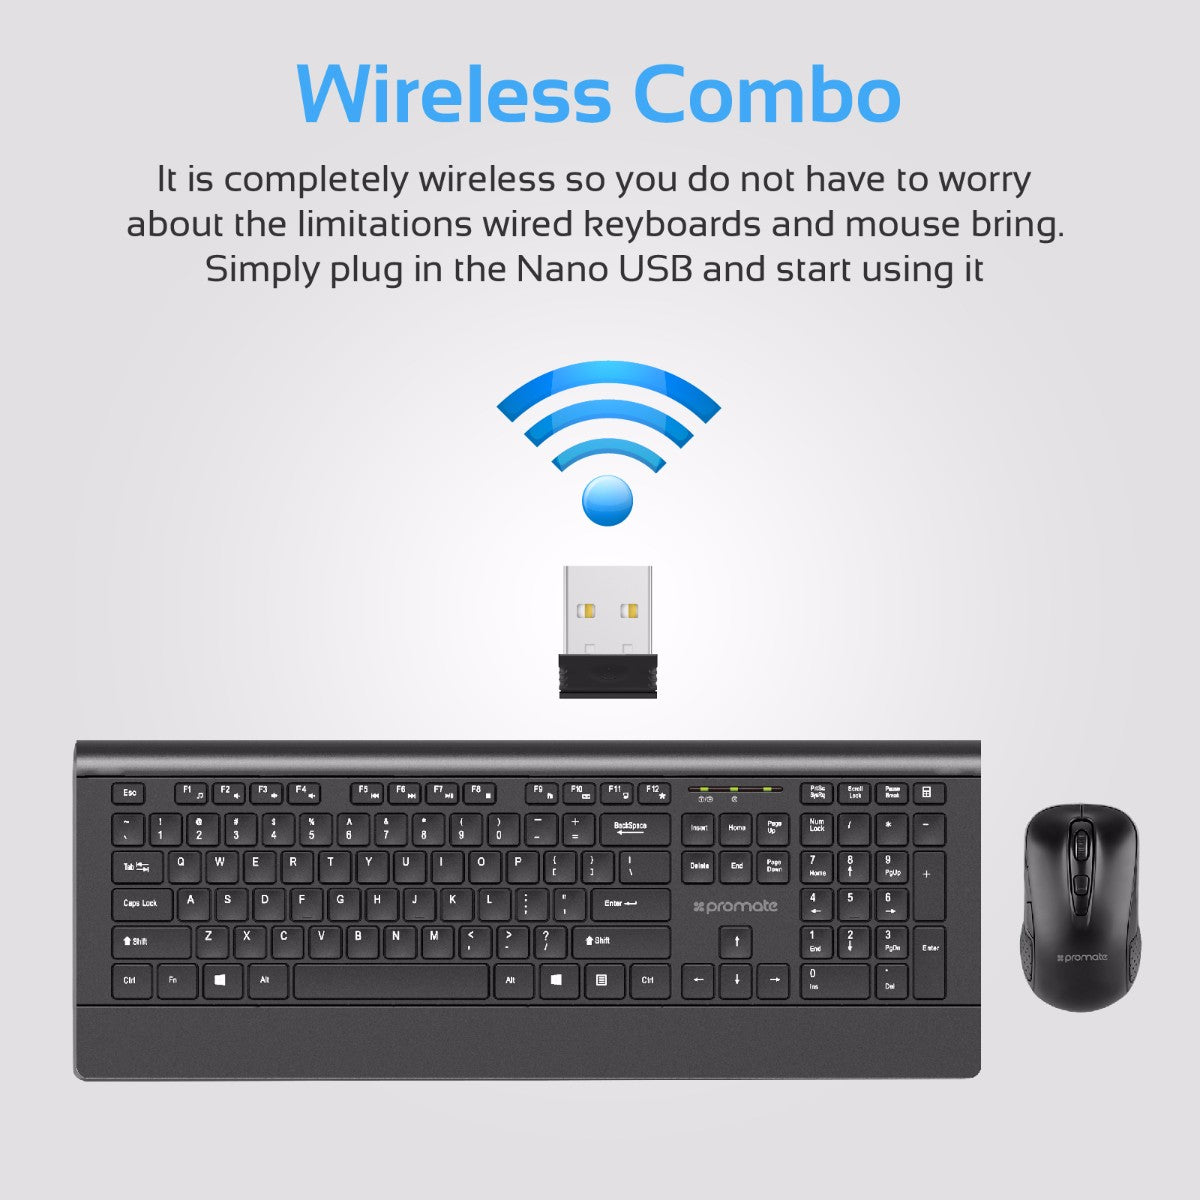 Promate - Wireless Keyboard and Mouse, Ergonomic Ultra-Slim 2.4GHz Cordless Combo Keyboard and 5 Button DPI Mouse with Wrist Rest Panel and Auto-Sleep Function for Desktop, PC, Windows, iOS, ProCombo-4